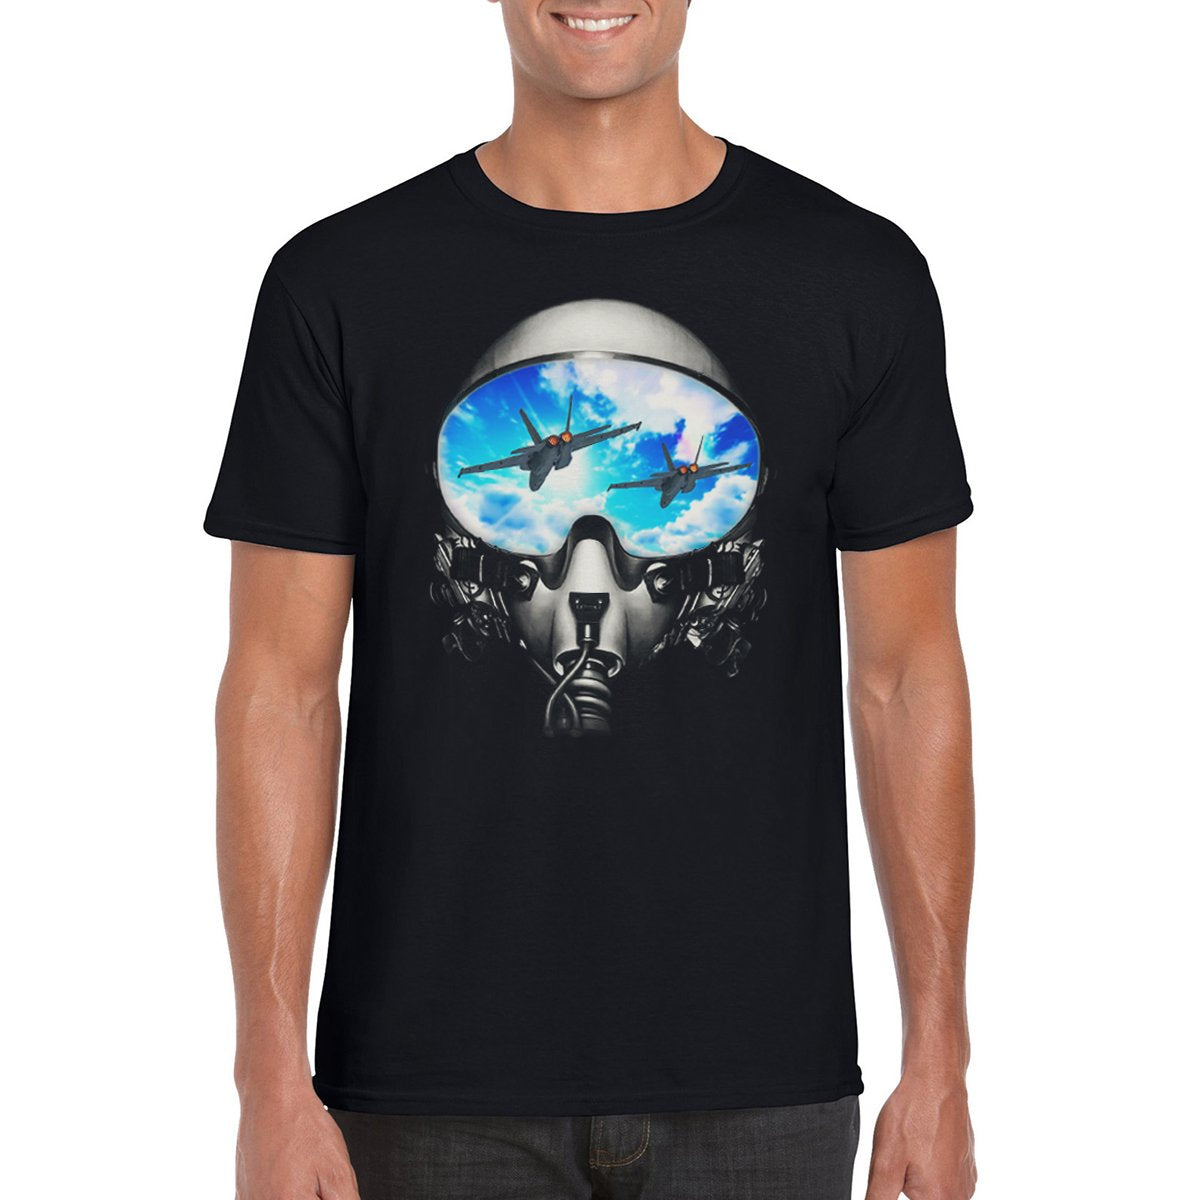 FIGHTER PILOT  Unisex Semi-Fitted T-Shirt